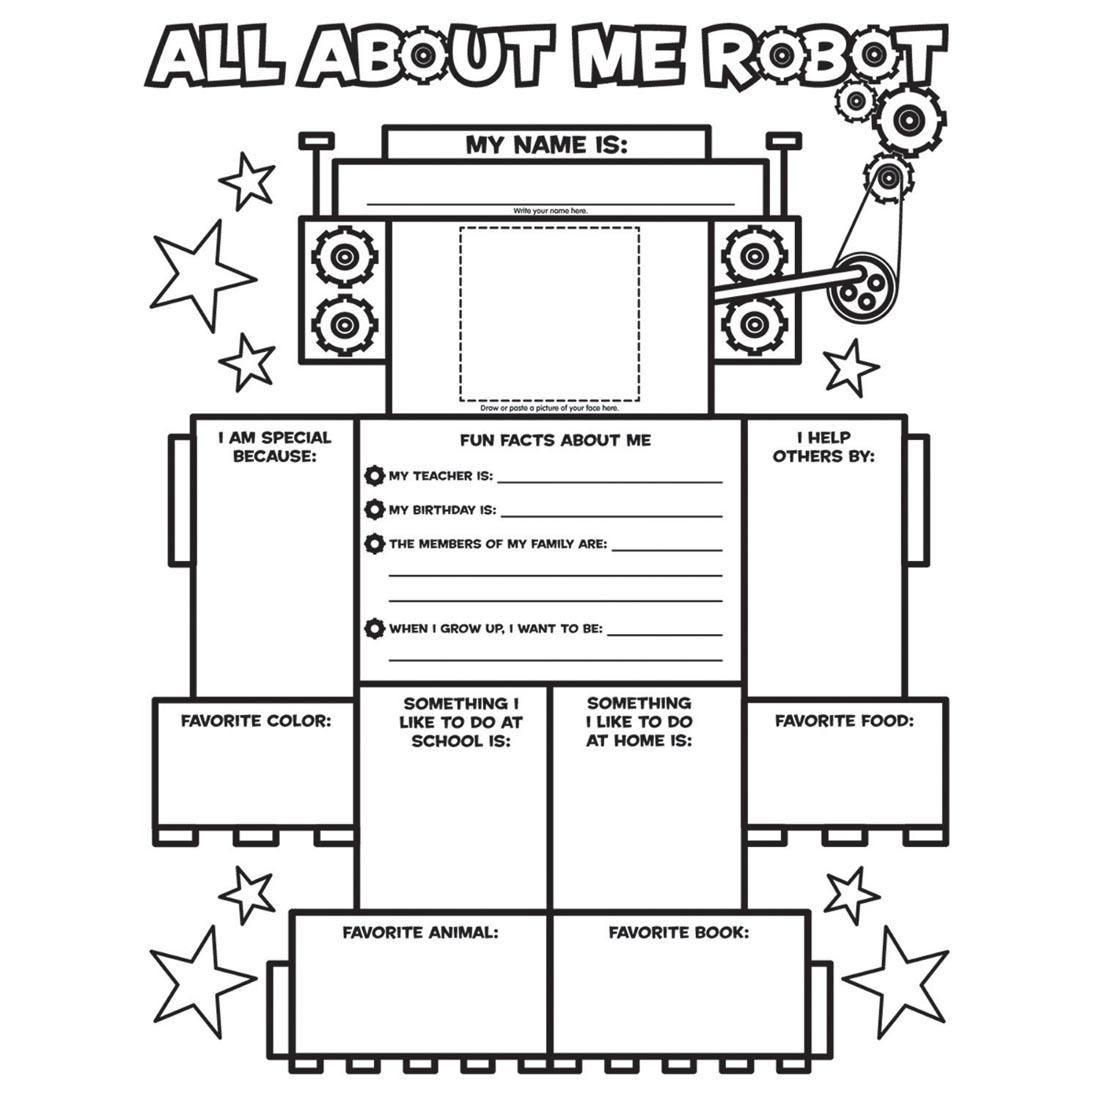 All About Me Robot Poster by Scholastic